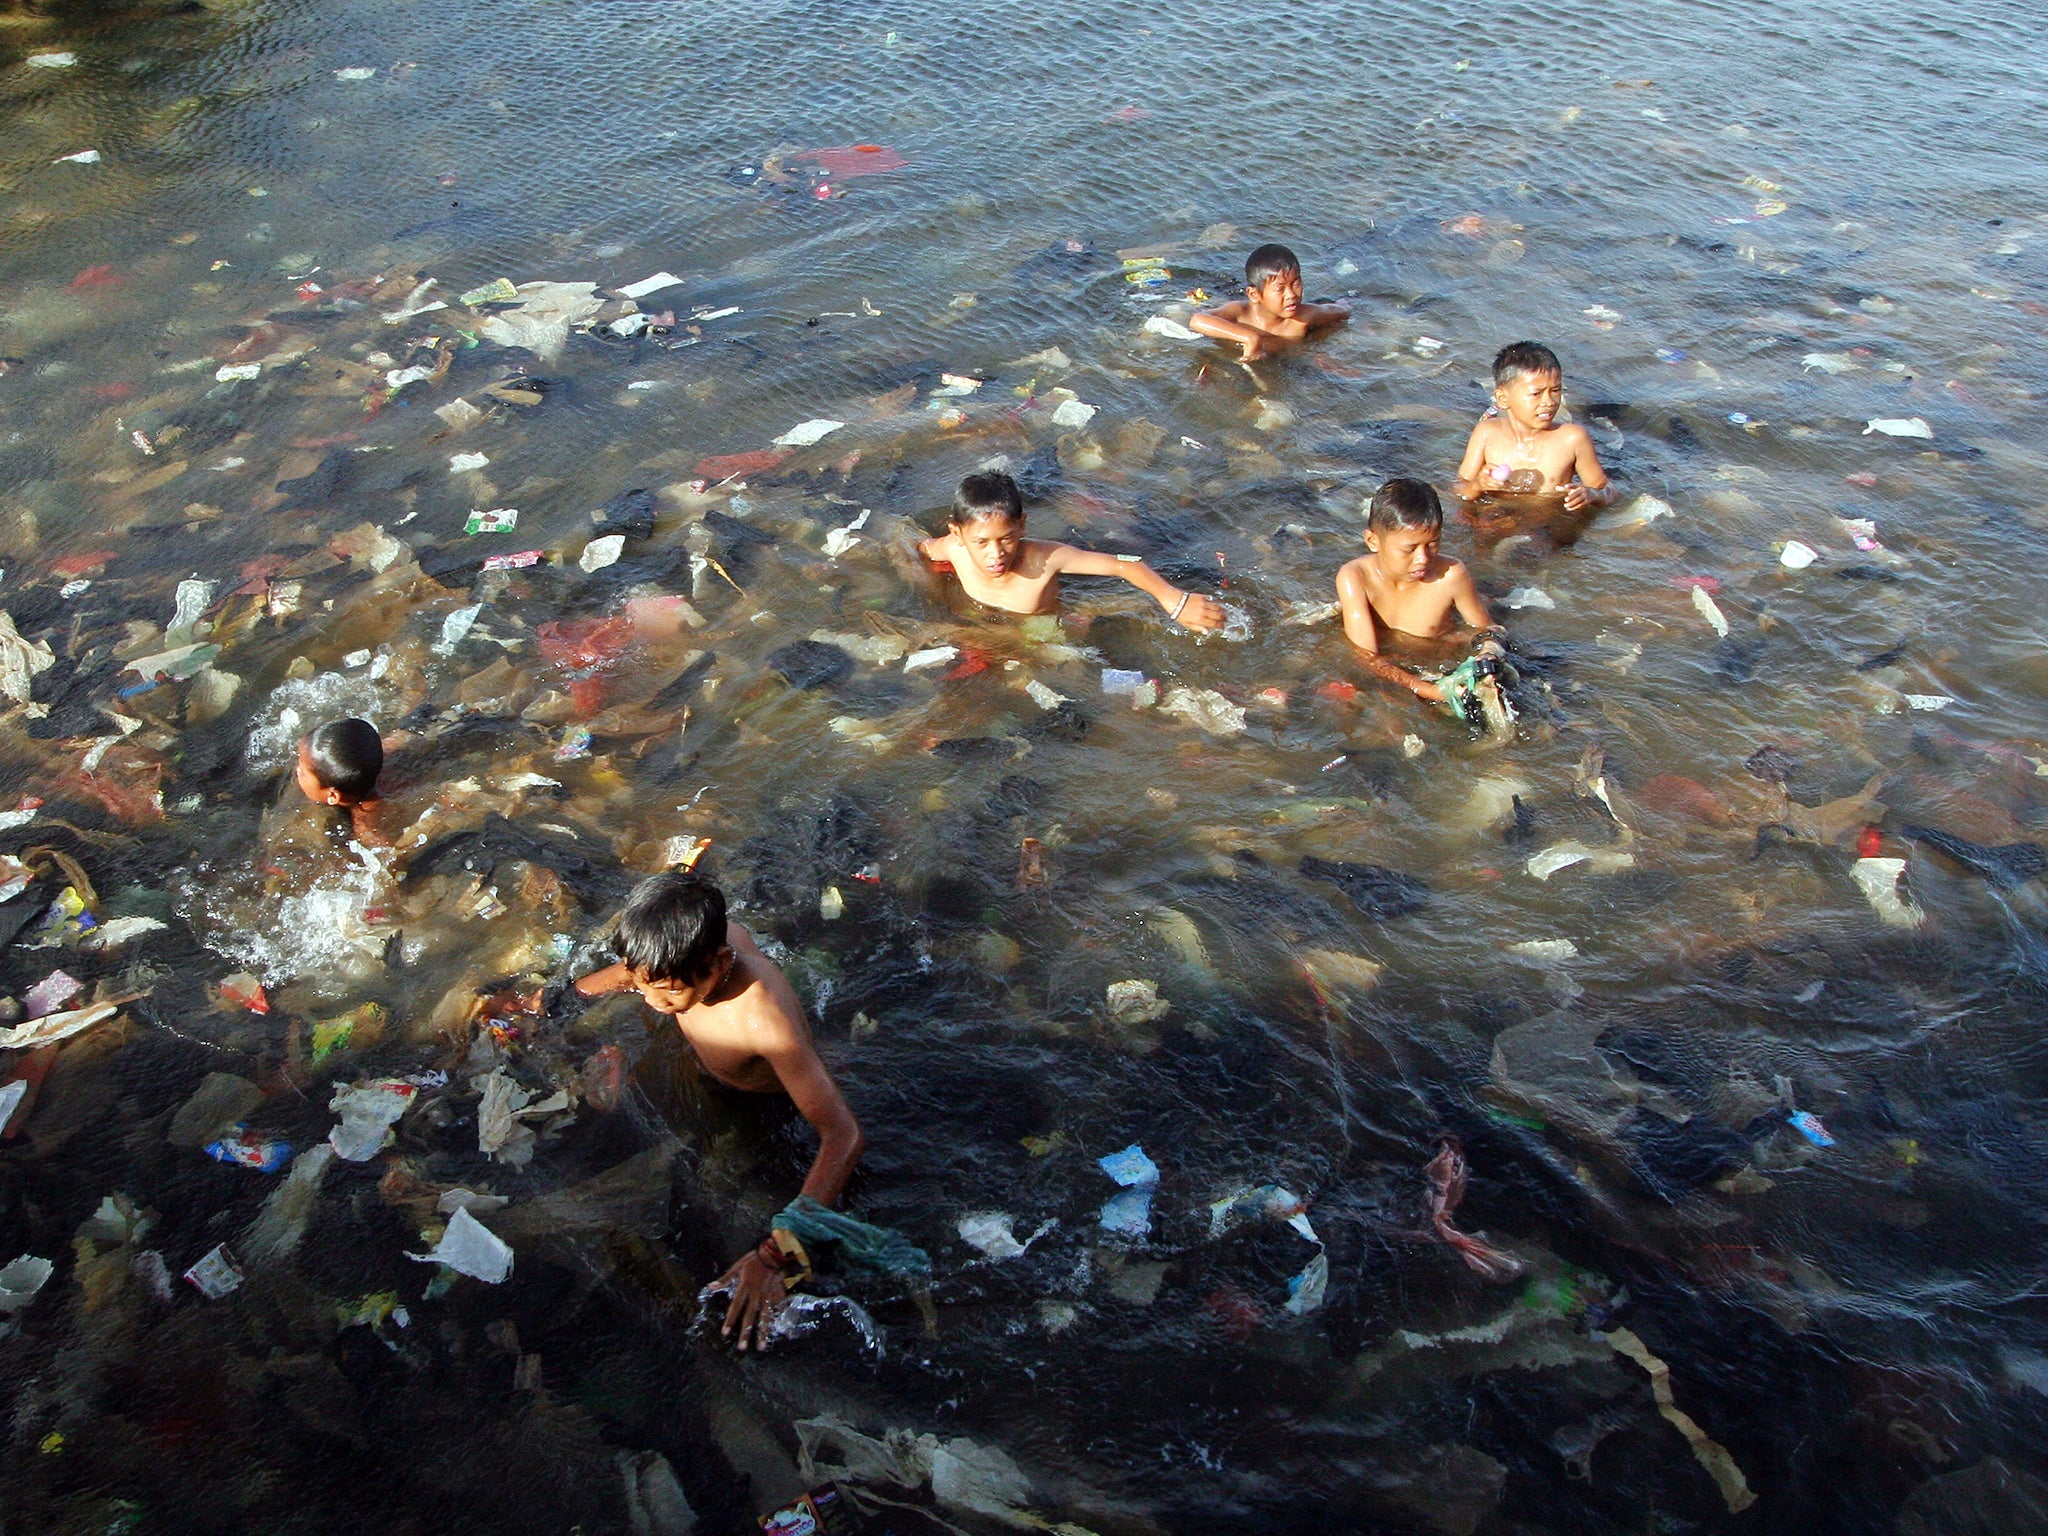 Plastic is polluting the world’s oceans: children swim in a sea full of garbage in North Jakarta, Indonesia